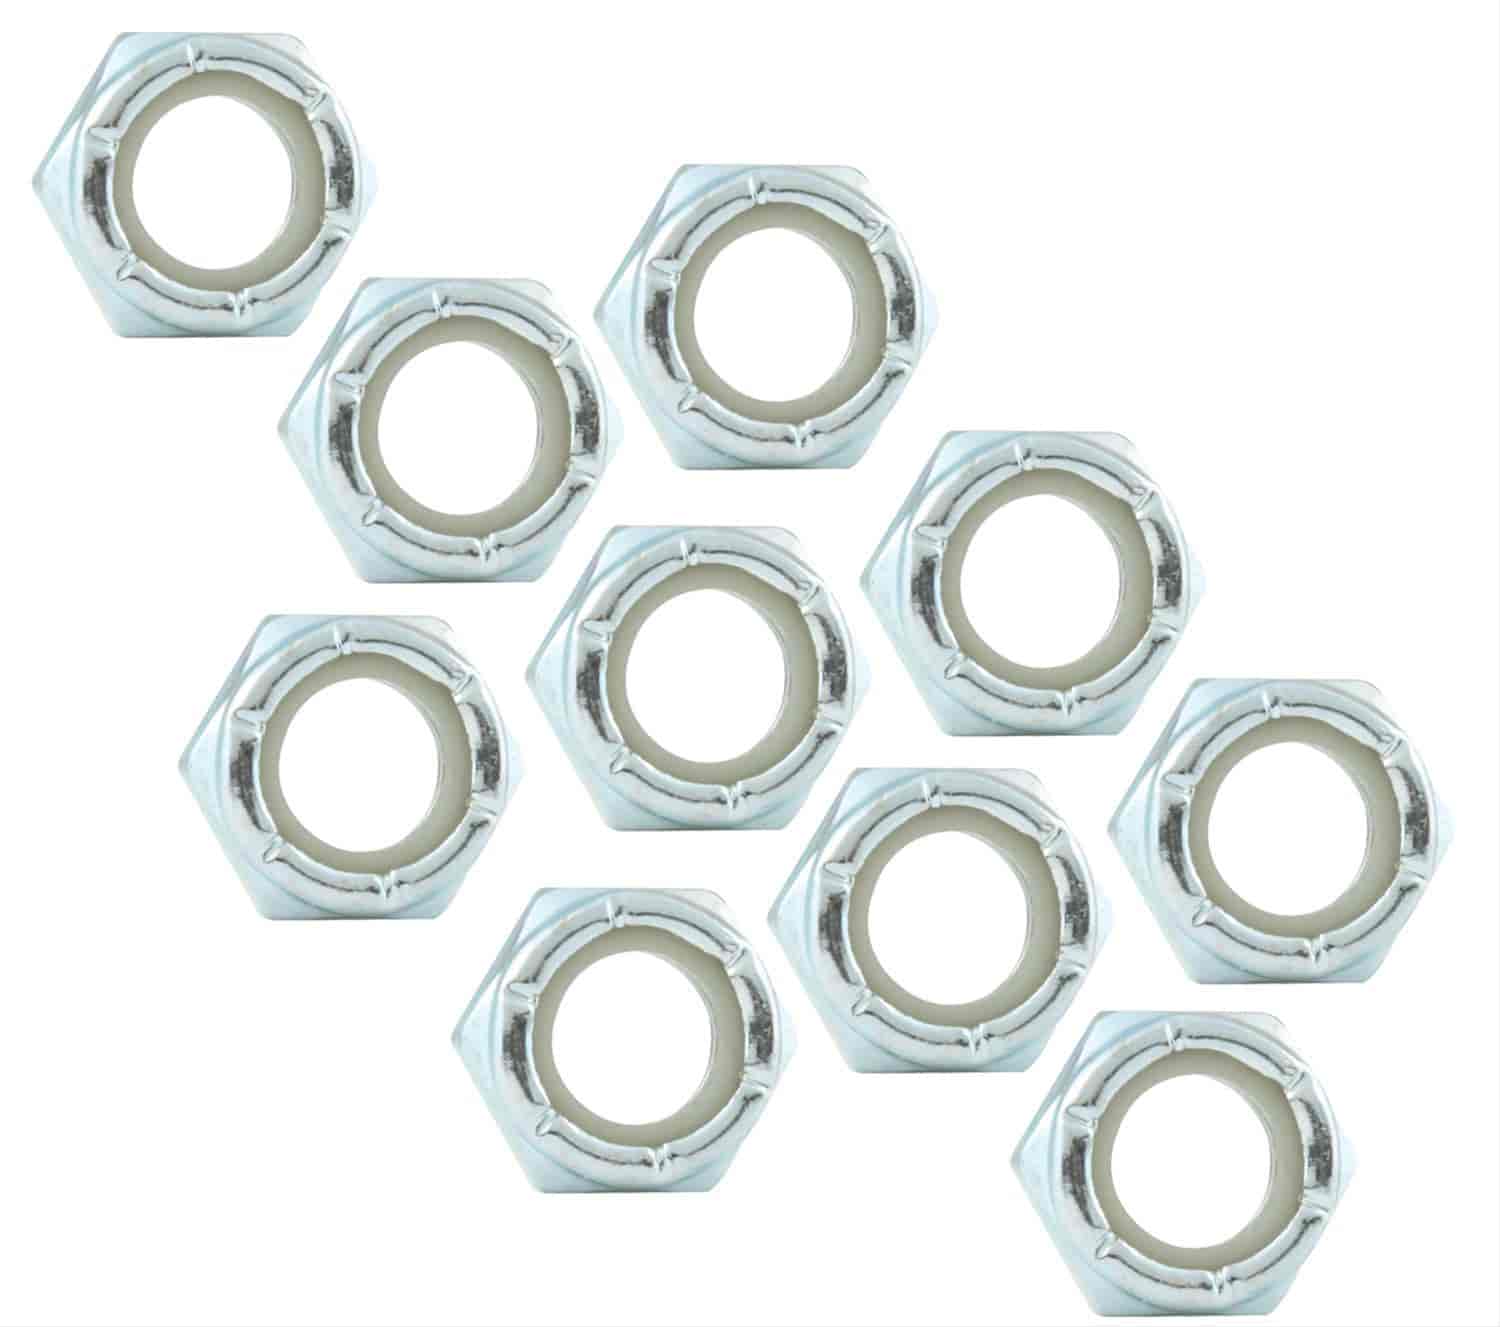 Coarse Thread Hex Nuts Thin With Nylon Inserts 1/2"-13